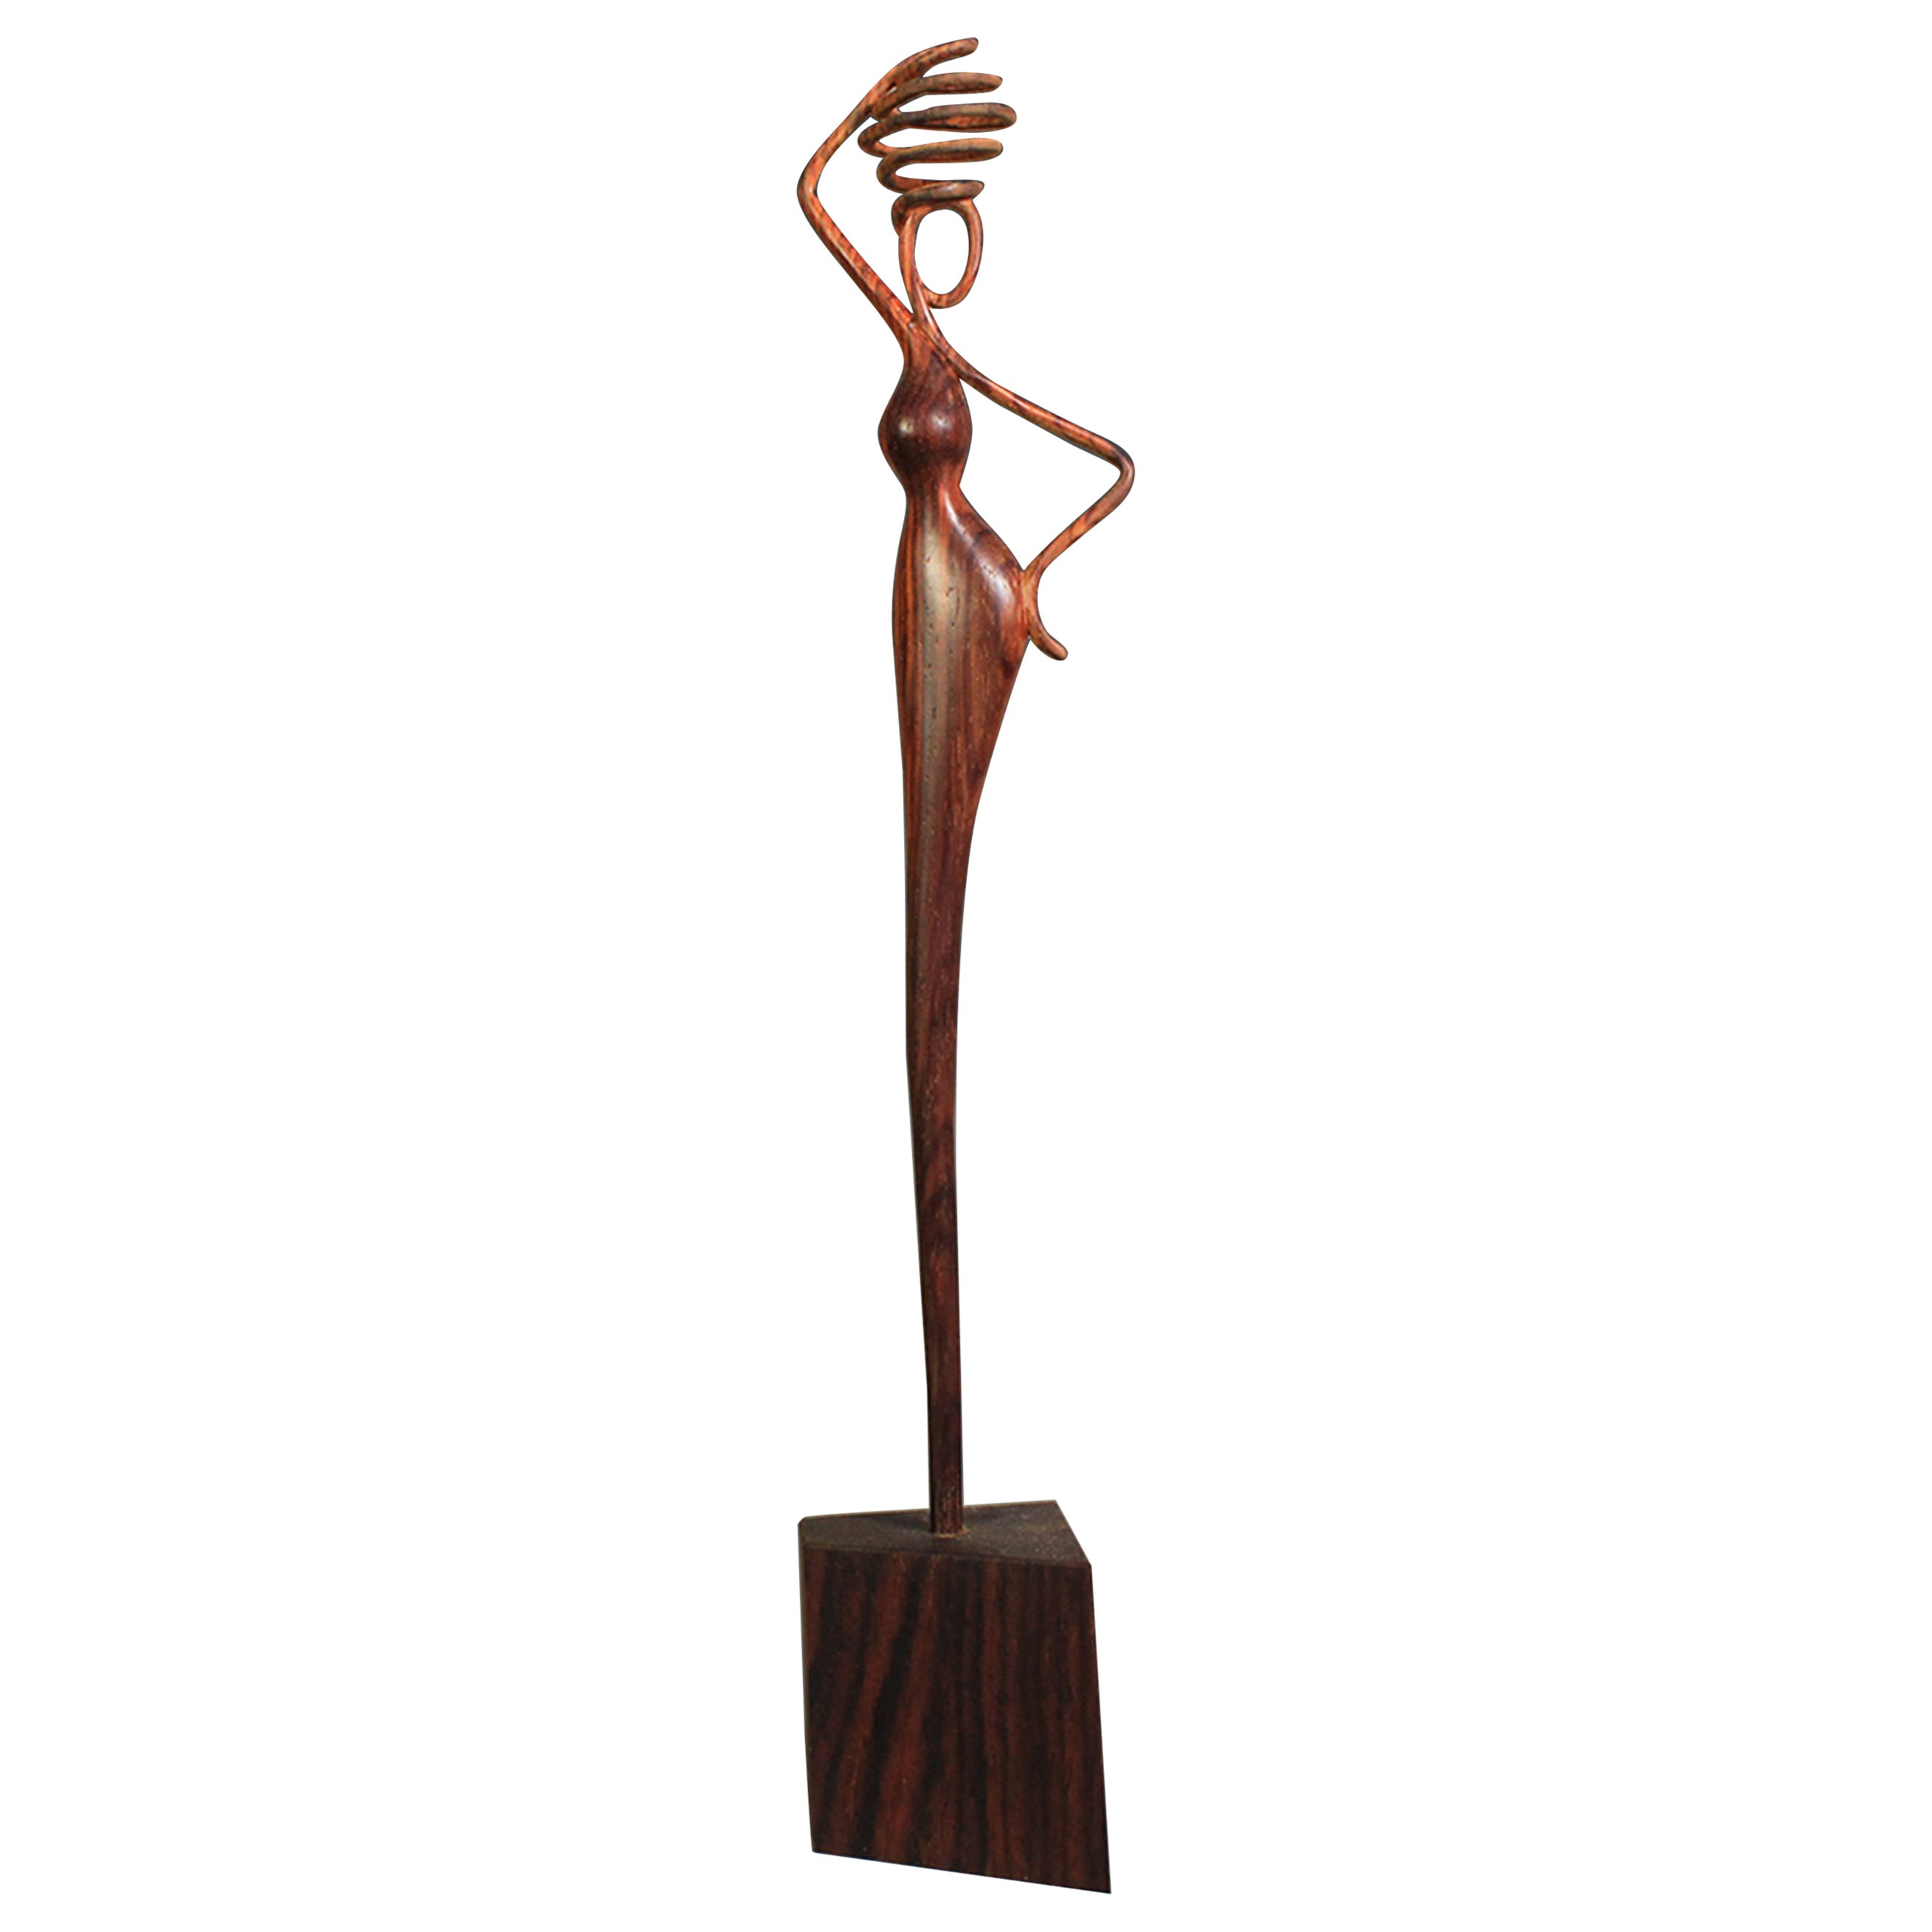 Girl with a Jar, Cocobolo Wood sculpture by Nairi Safaryan